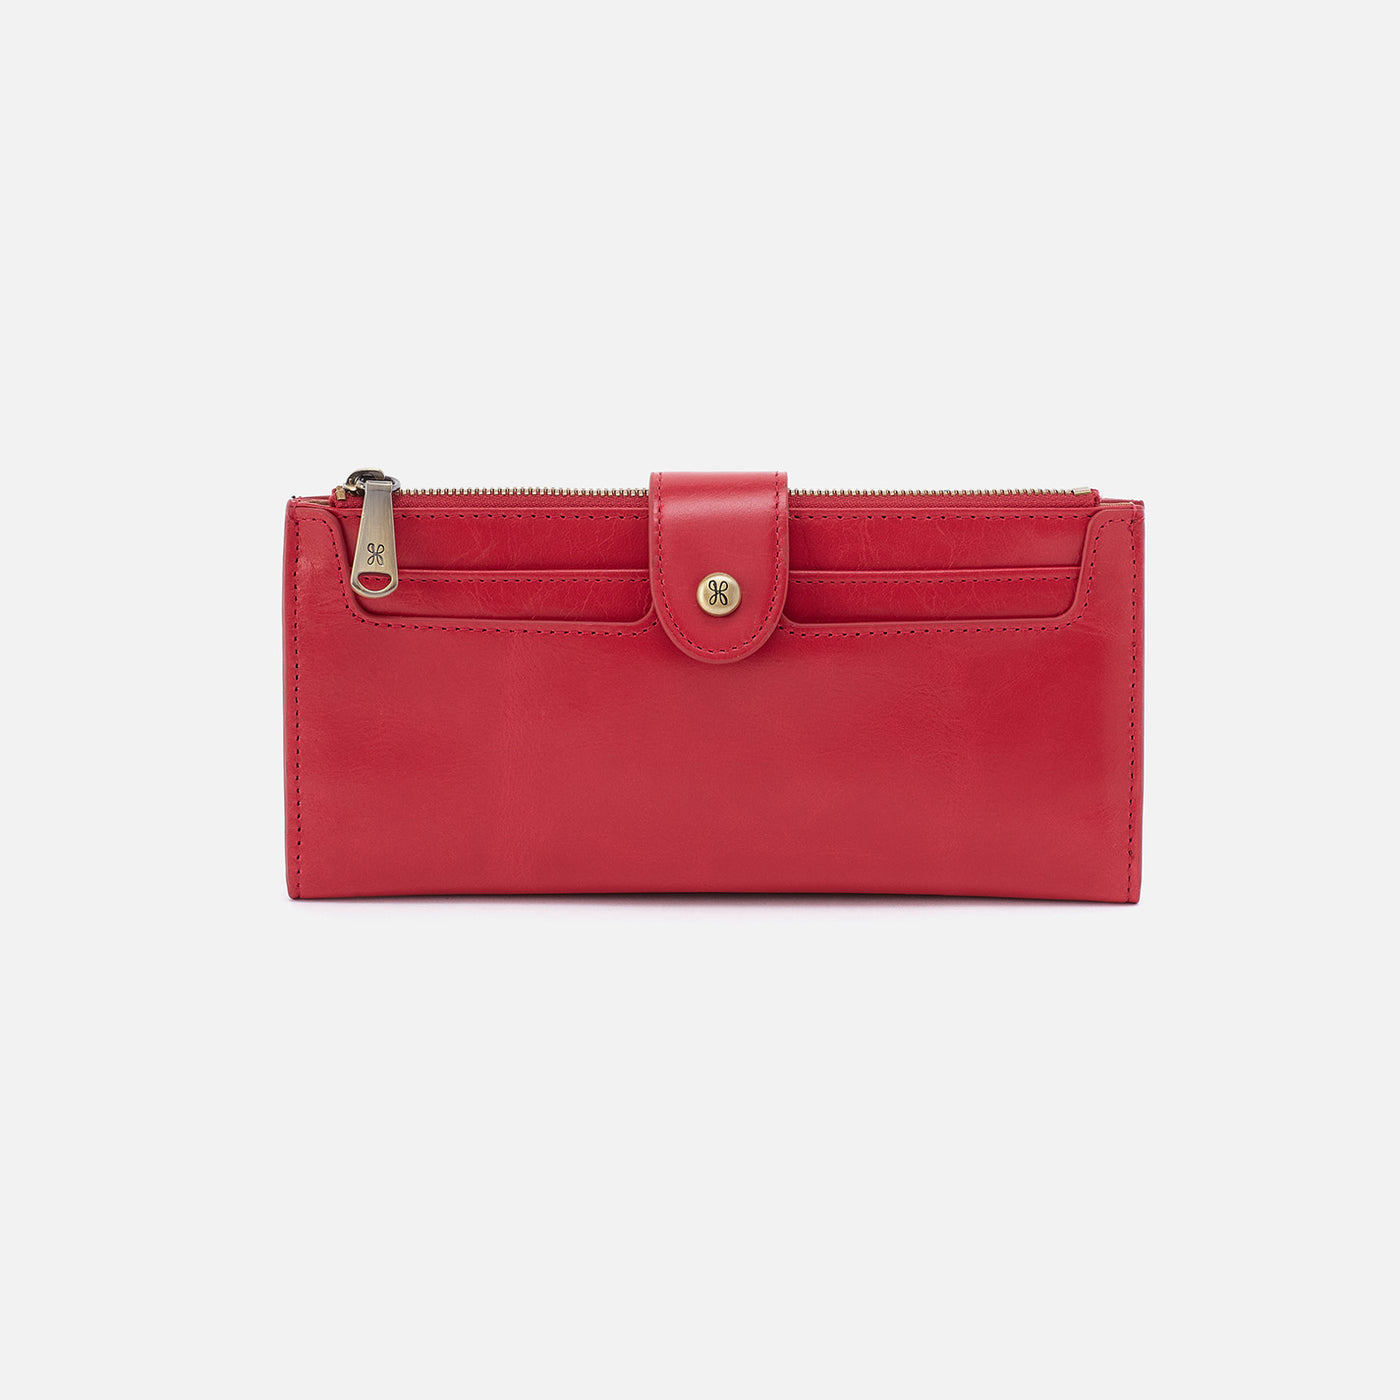 Dunn Large Wallet In Polished Leather - Hibiscus